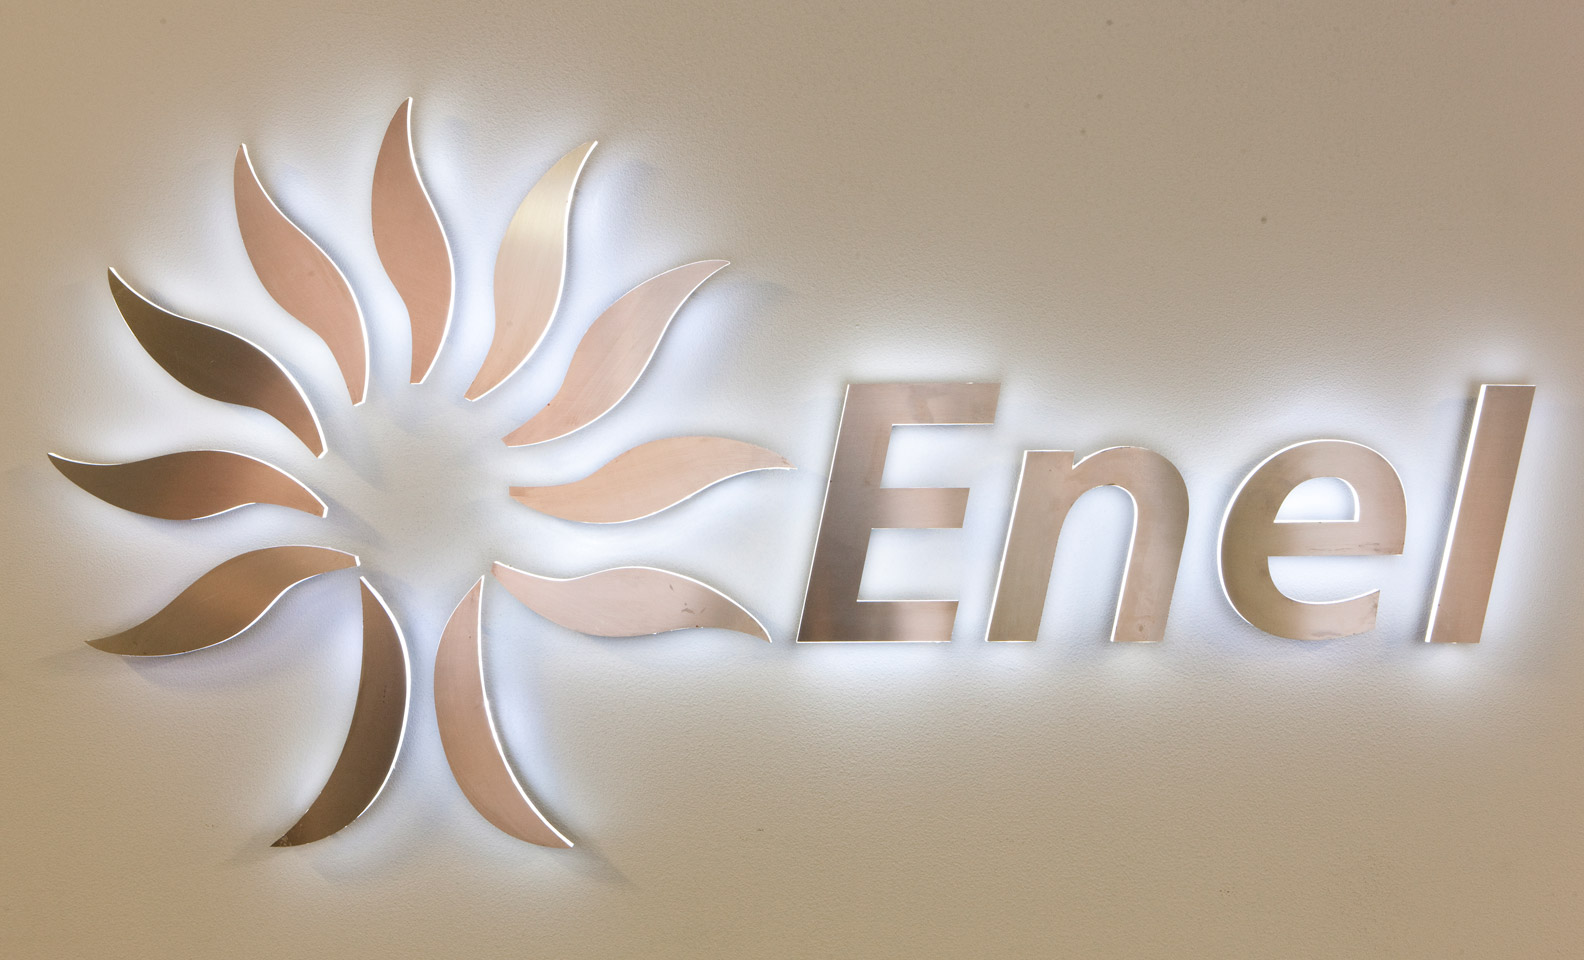 Enel: the most sustainable company of the year 